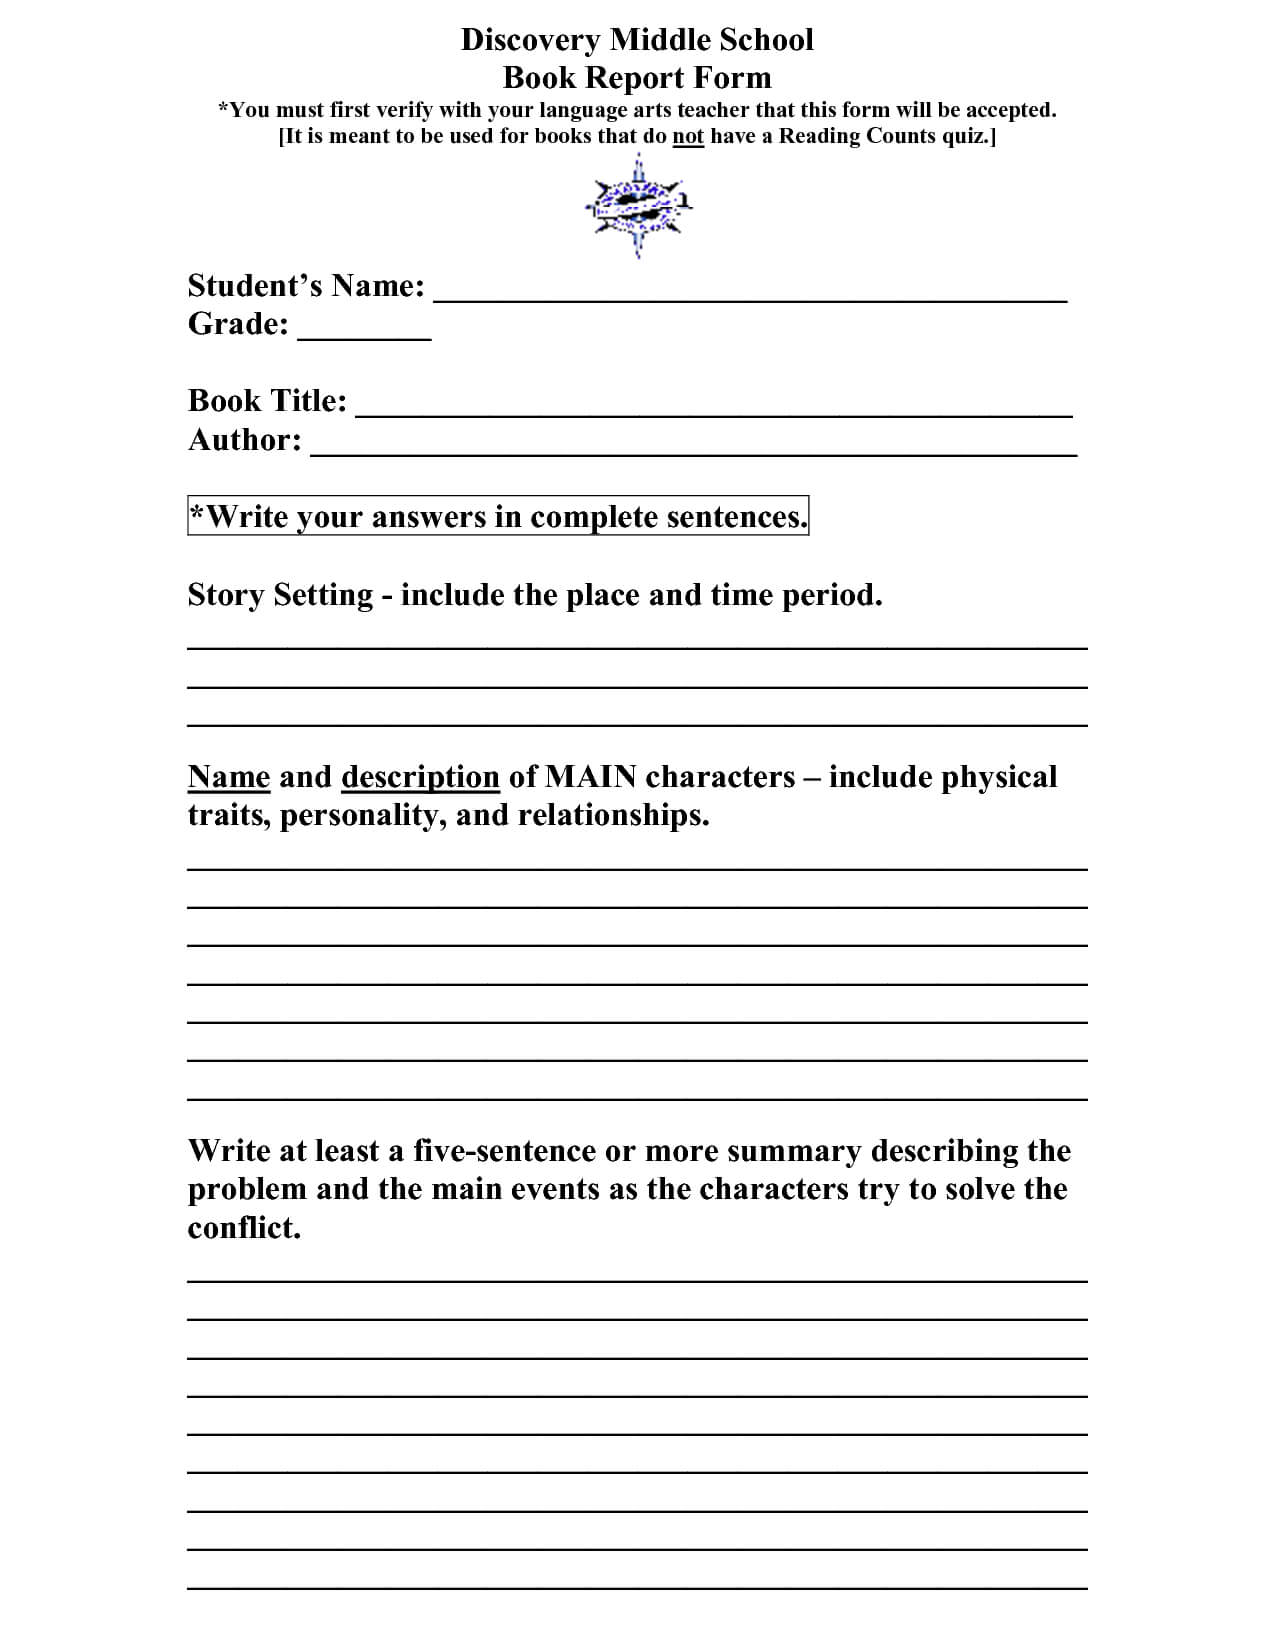 Scope Of Work Template | Book Report Templates, High School Throughout Book Report Template Middle School